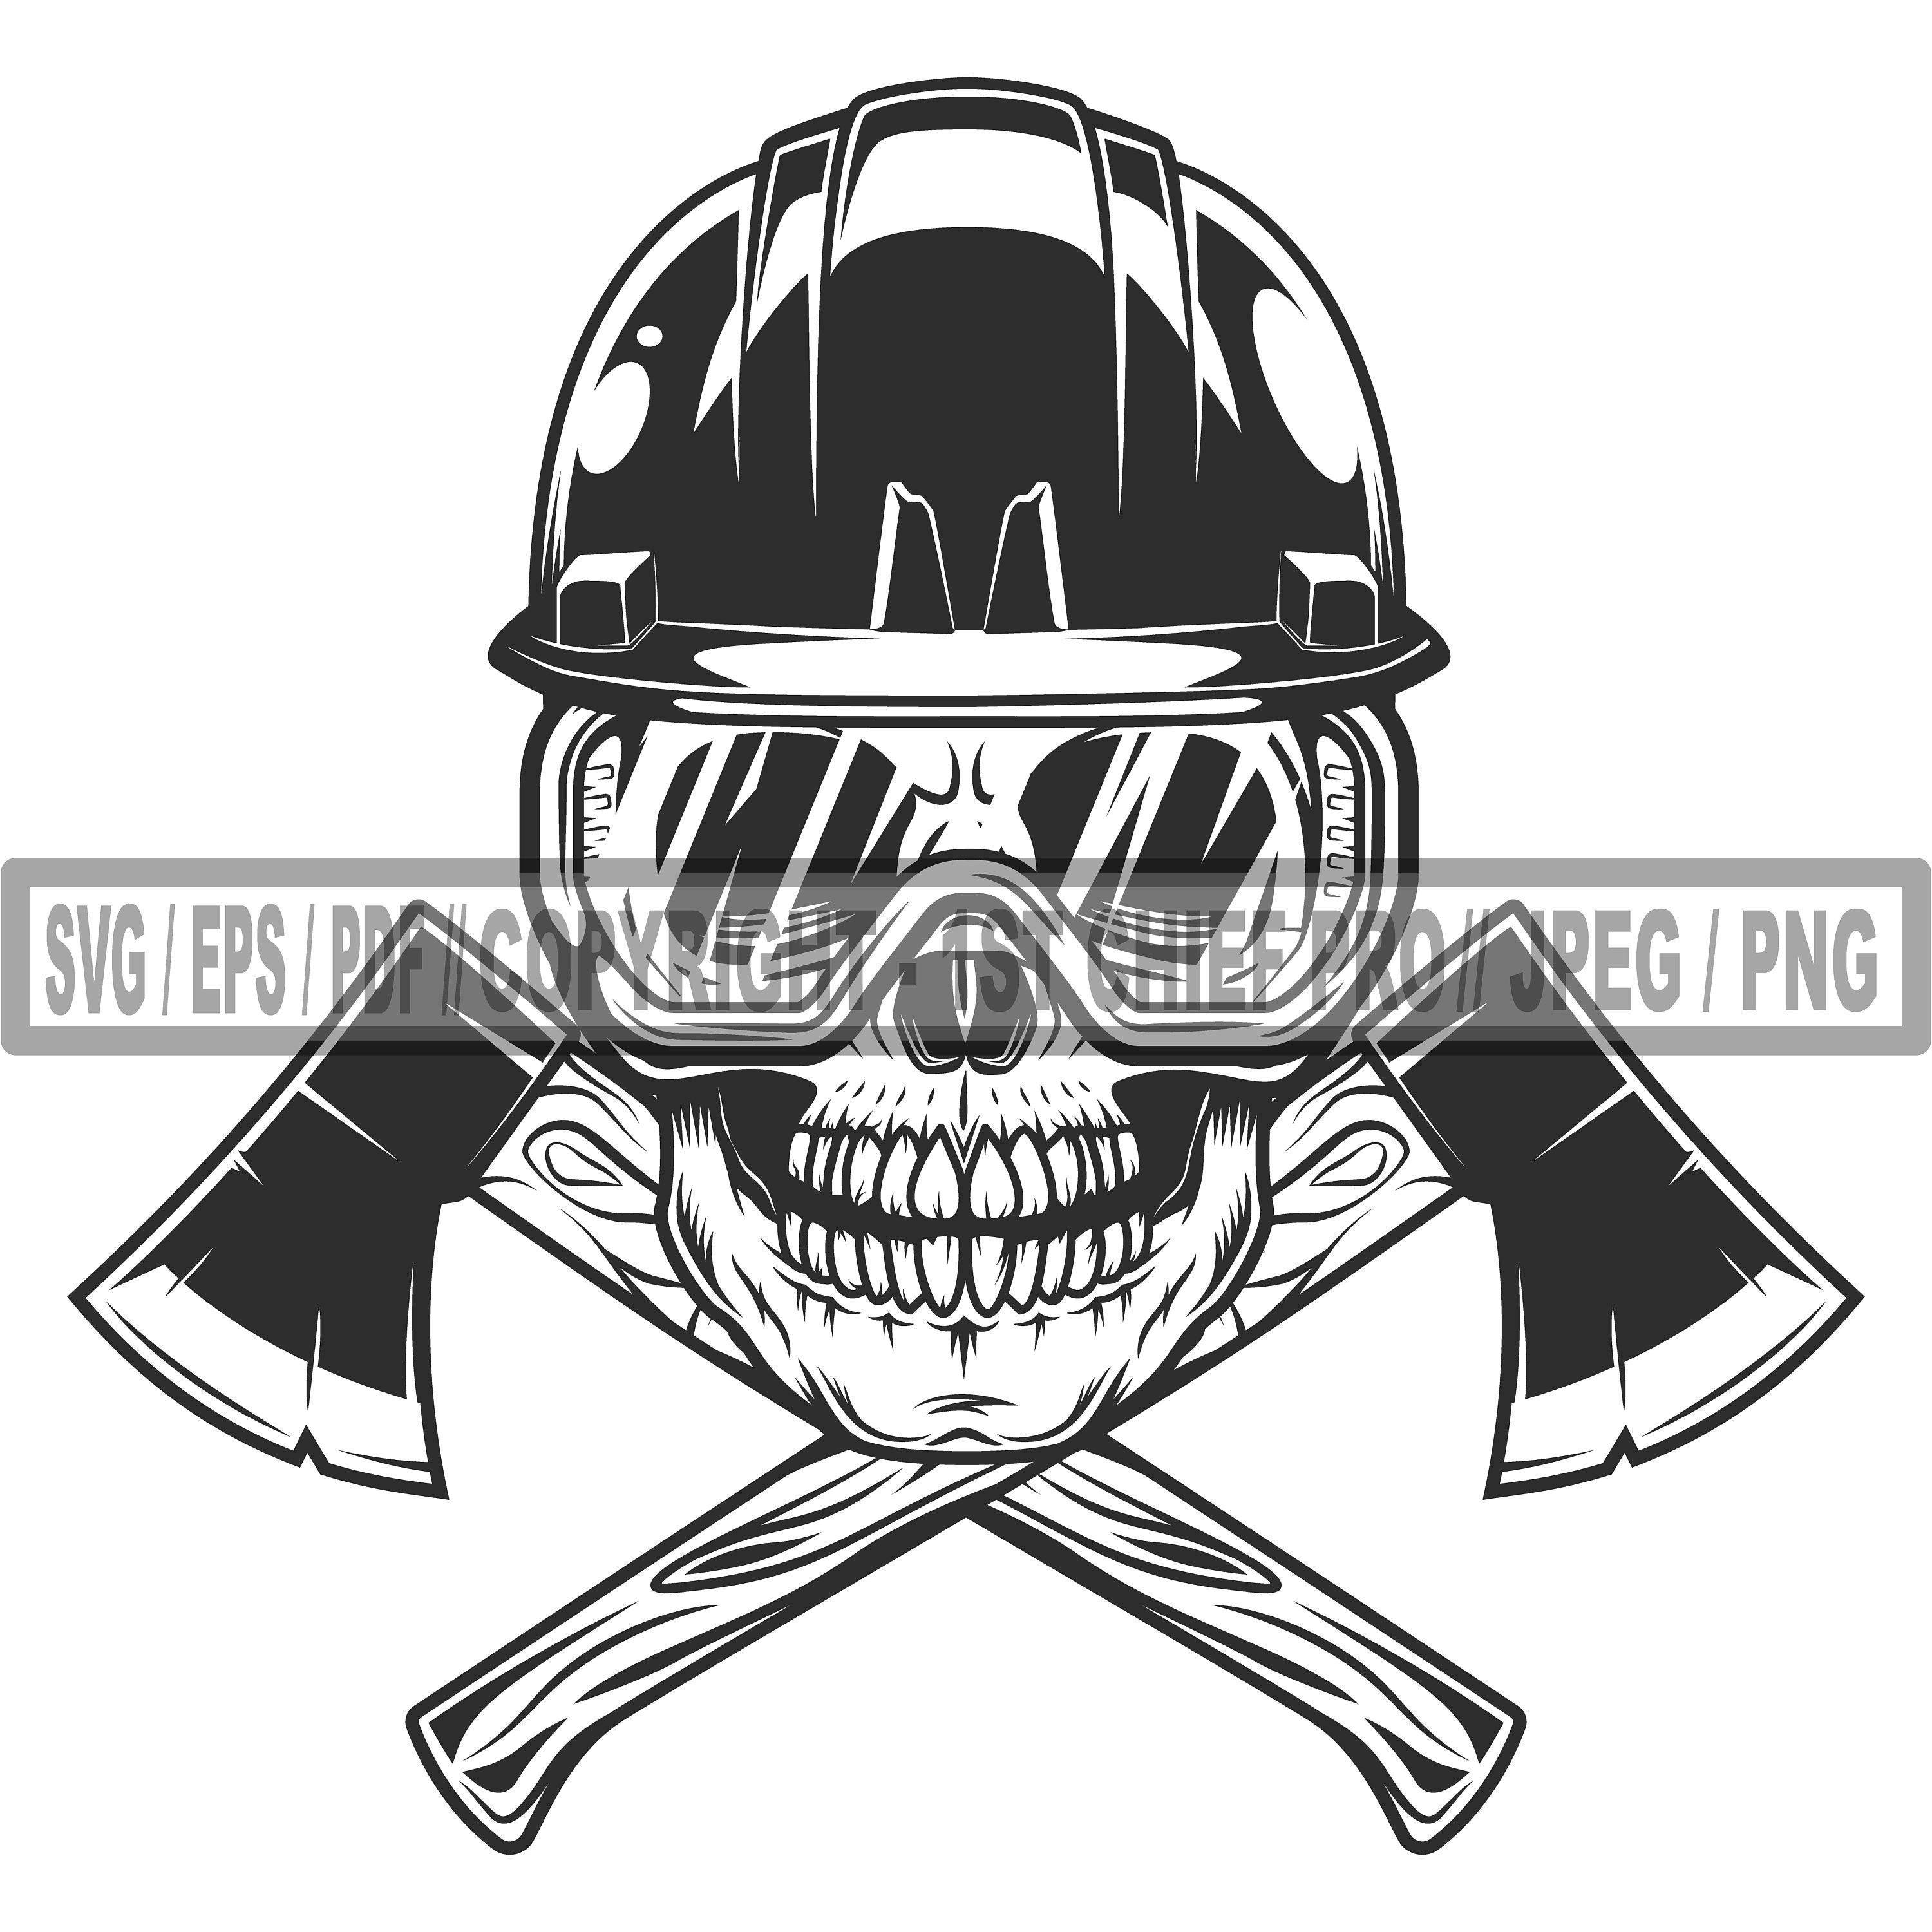 Skull Svg in Hard Hat Svg With Glasses and Lumber Axe Svg. Axe Svg and ...